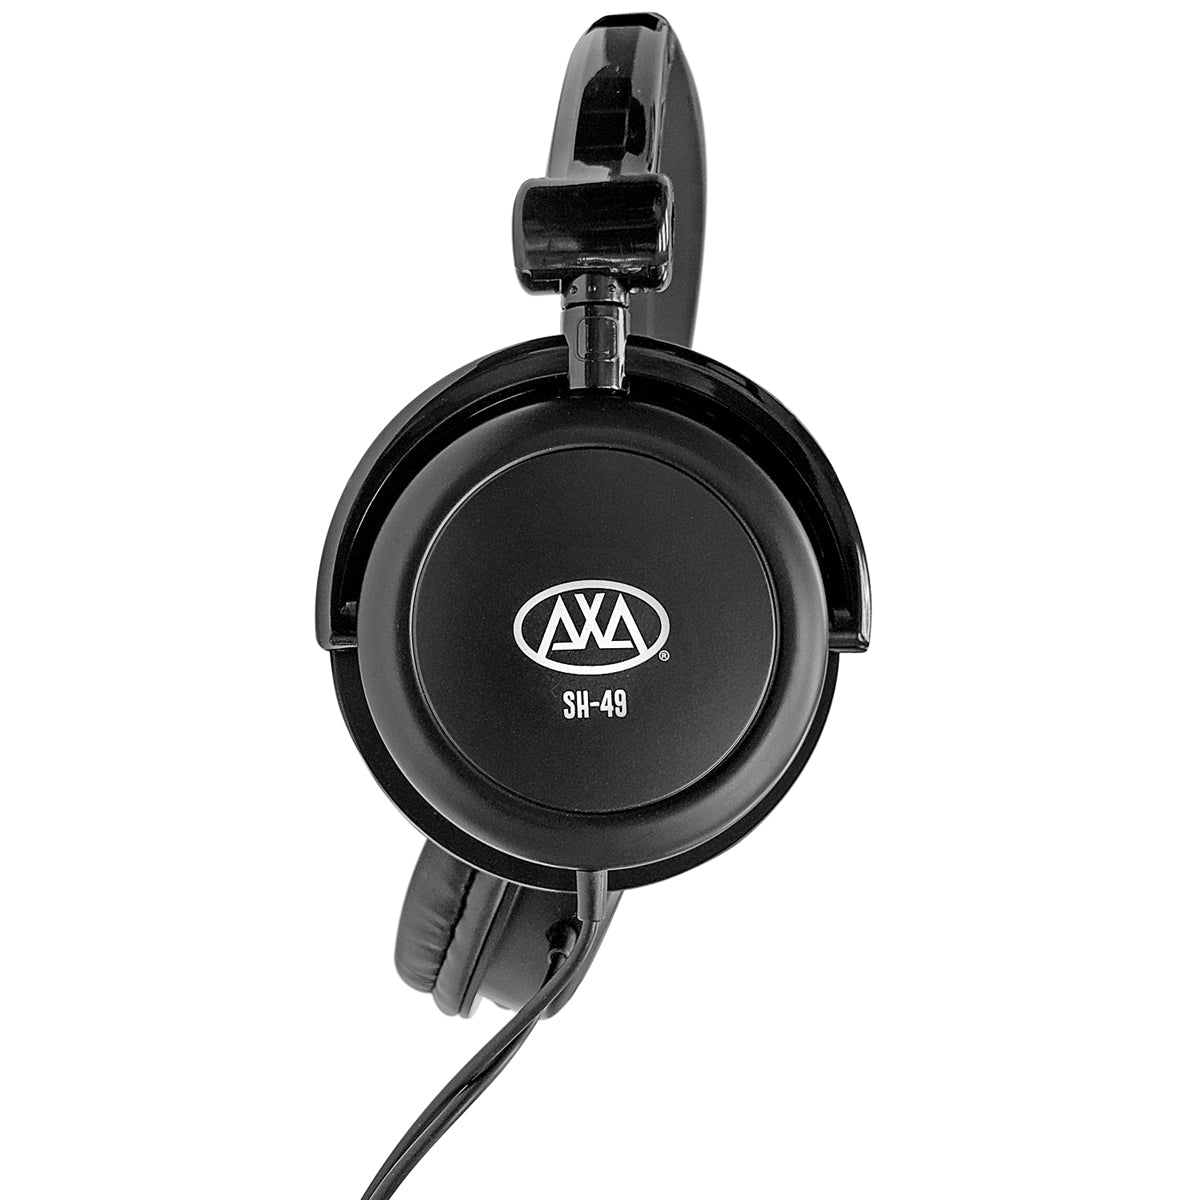 AxcessAbles On-Ear Closed-Back Studio/DJ Headphones with 6ft Cable and 1/4-inch Jack Adapter | 38mm Neodymium Driver Swiveling Cups| Guitar | Recording (SH-49)